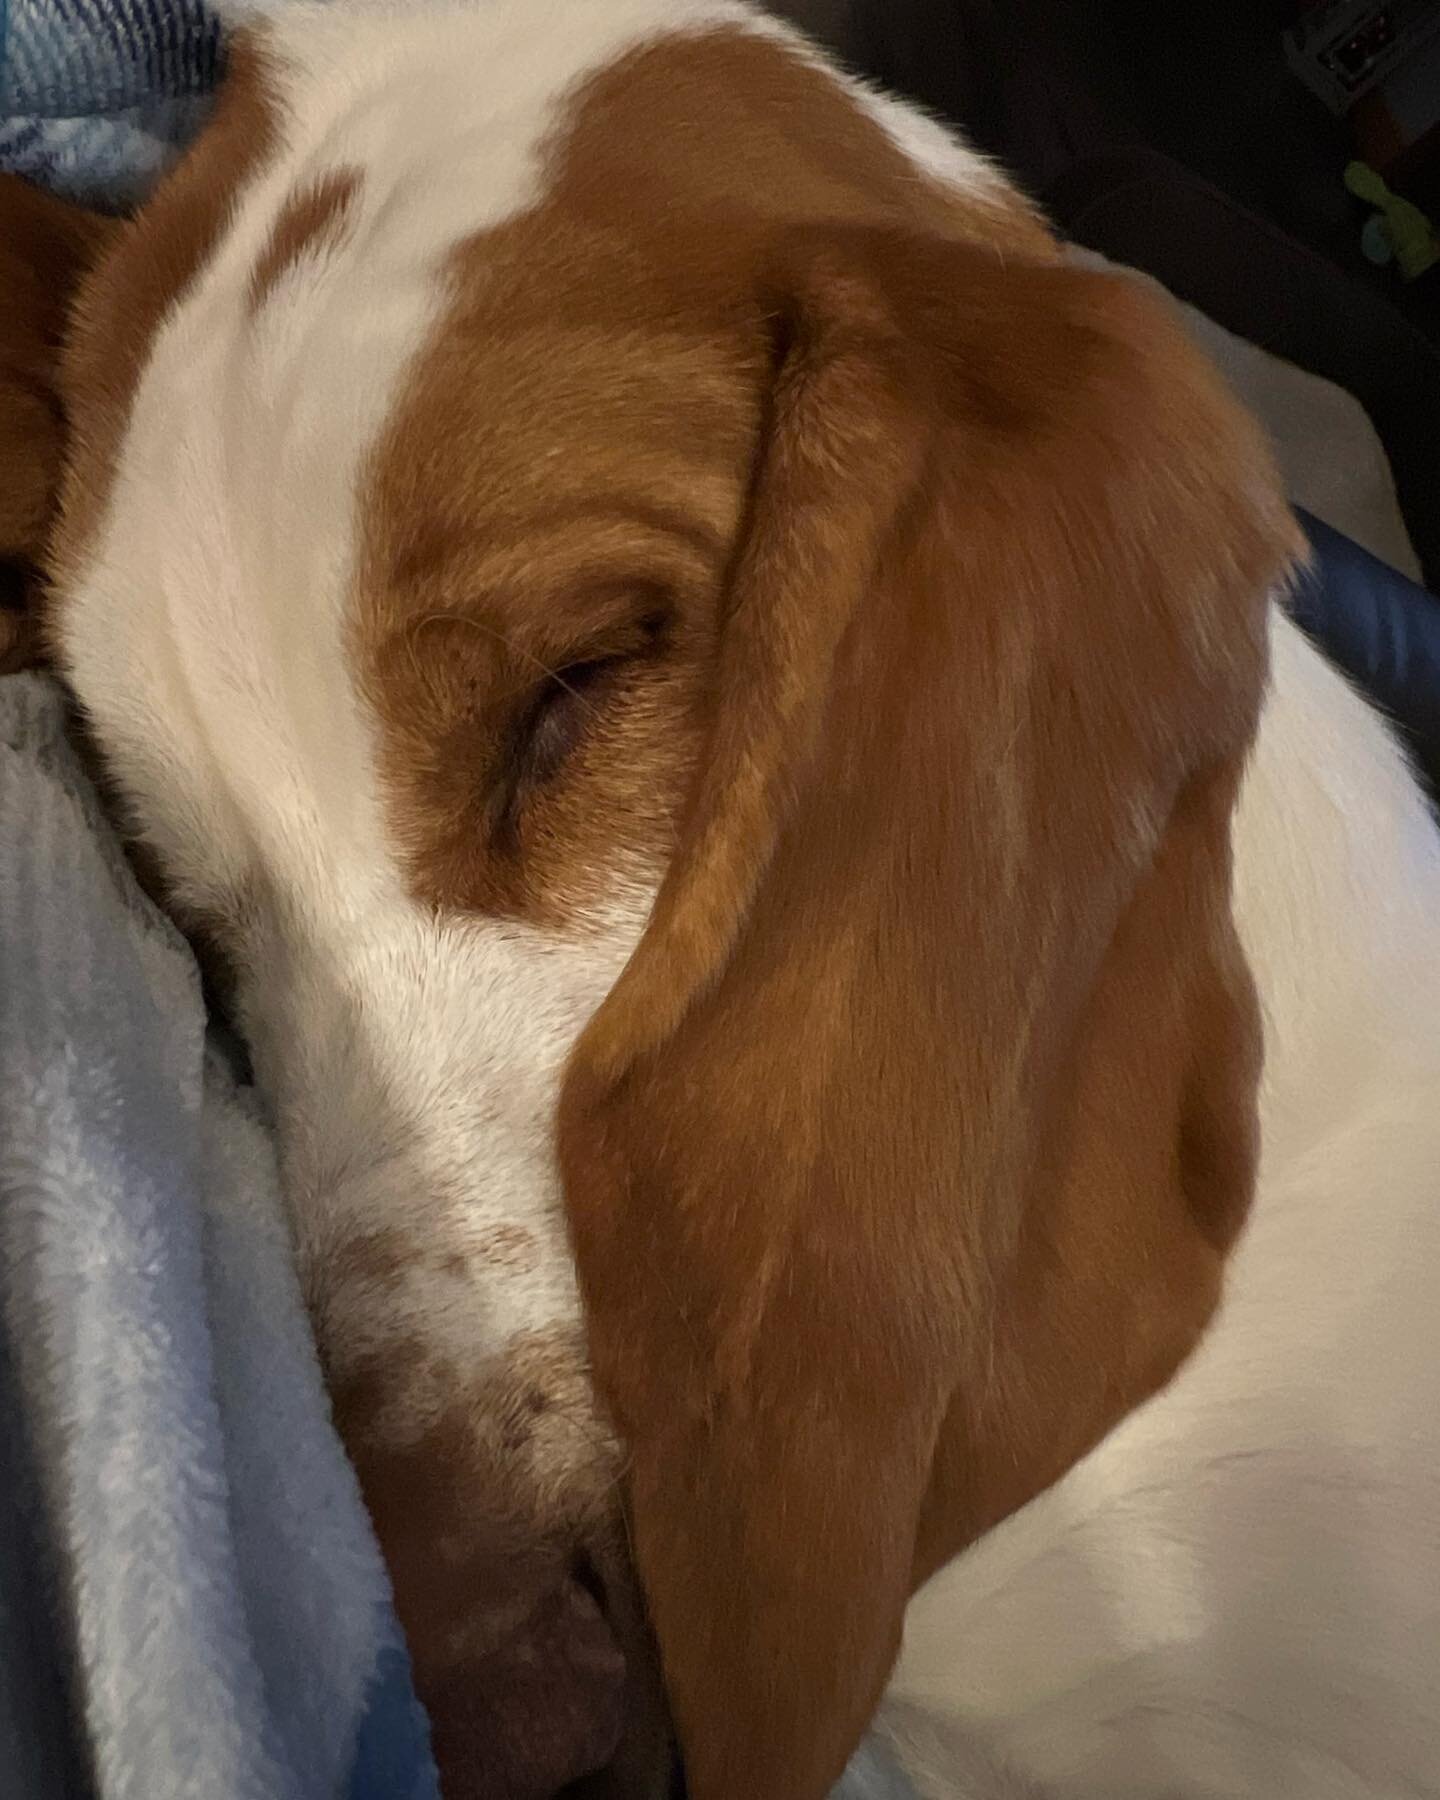 Sleepy puppy on this cold morning. Good thing I have my own nose blanket. These ears are amazing! #PuppyNaps #BassetHoundEars #BssetHound #SleepyPuppy